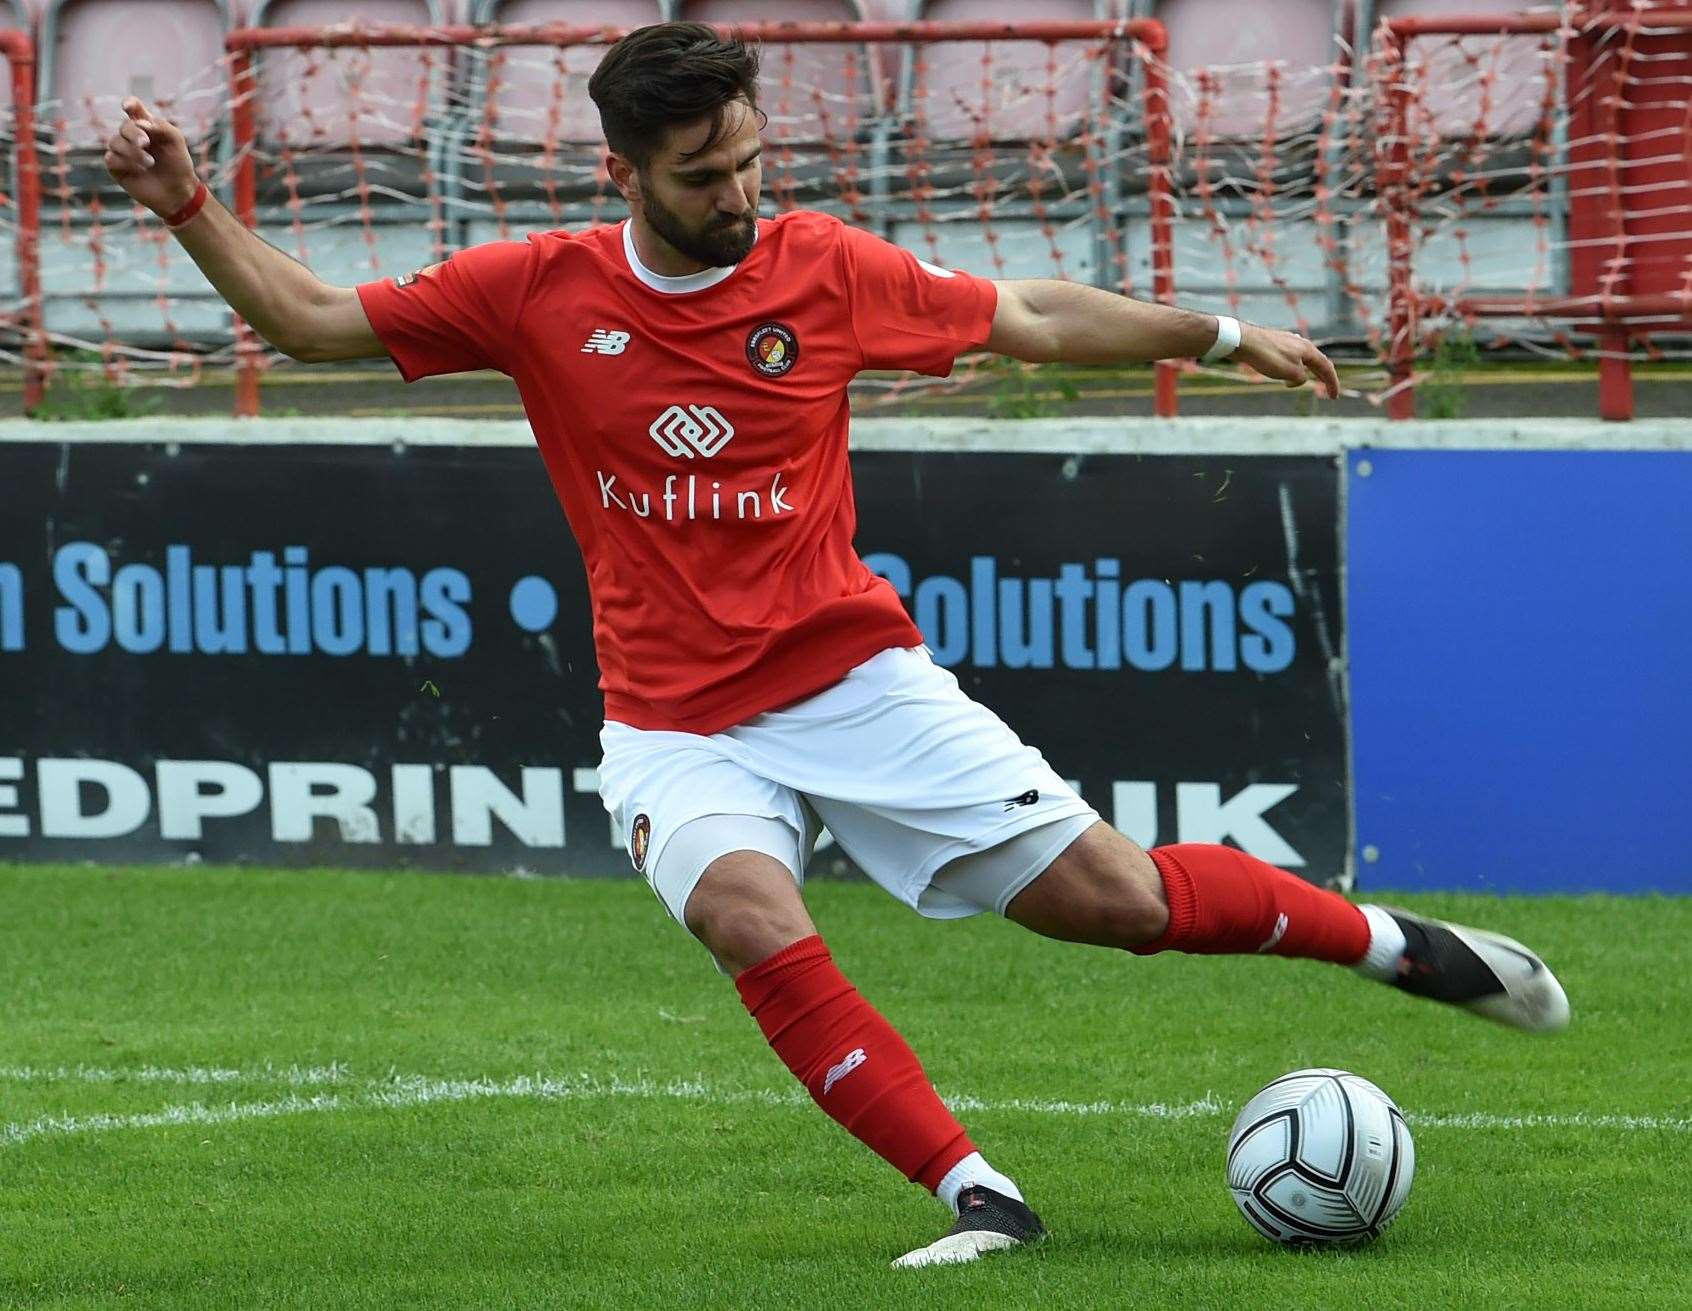 Sefa Kahraman is hoping to find a new club in Turkey after leaving Ebbsfleet. Picture: Keith Gillard